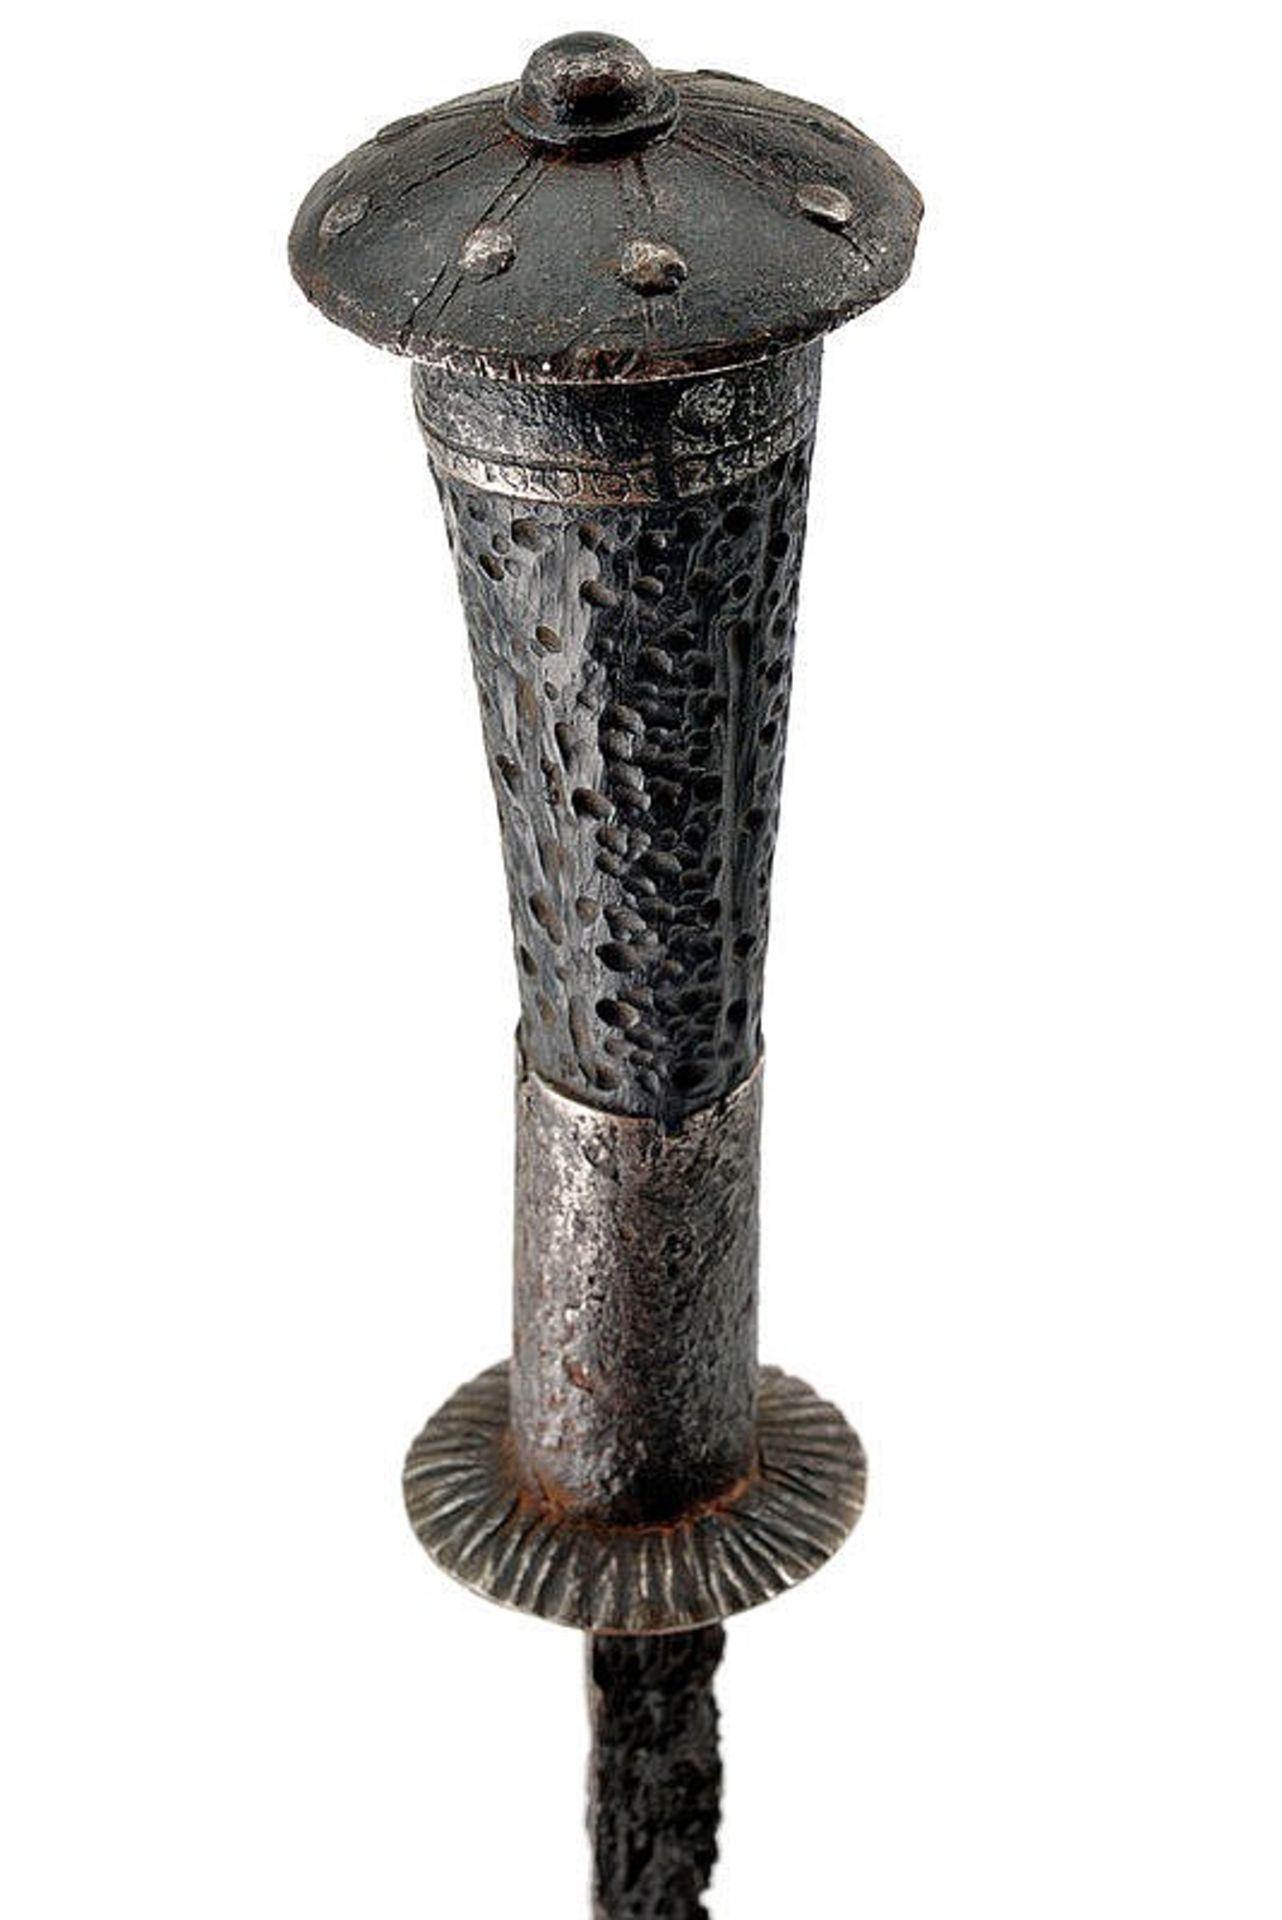 A very rare Medieval Western Europe rondel dagger with wooden grip and scabbard details 14th-15th C. - Image 7 of 7